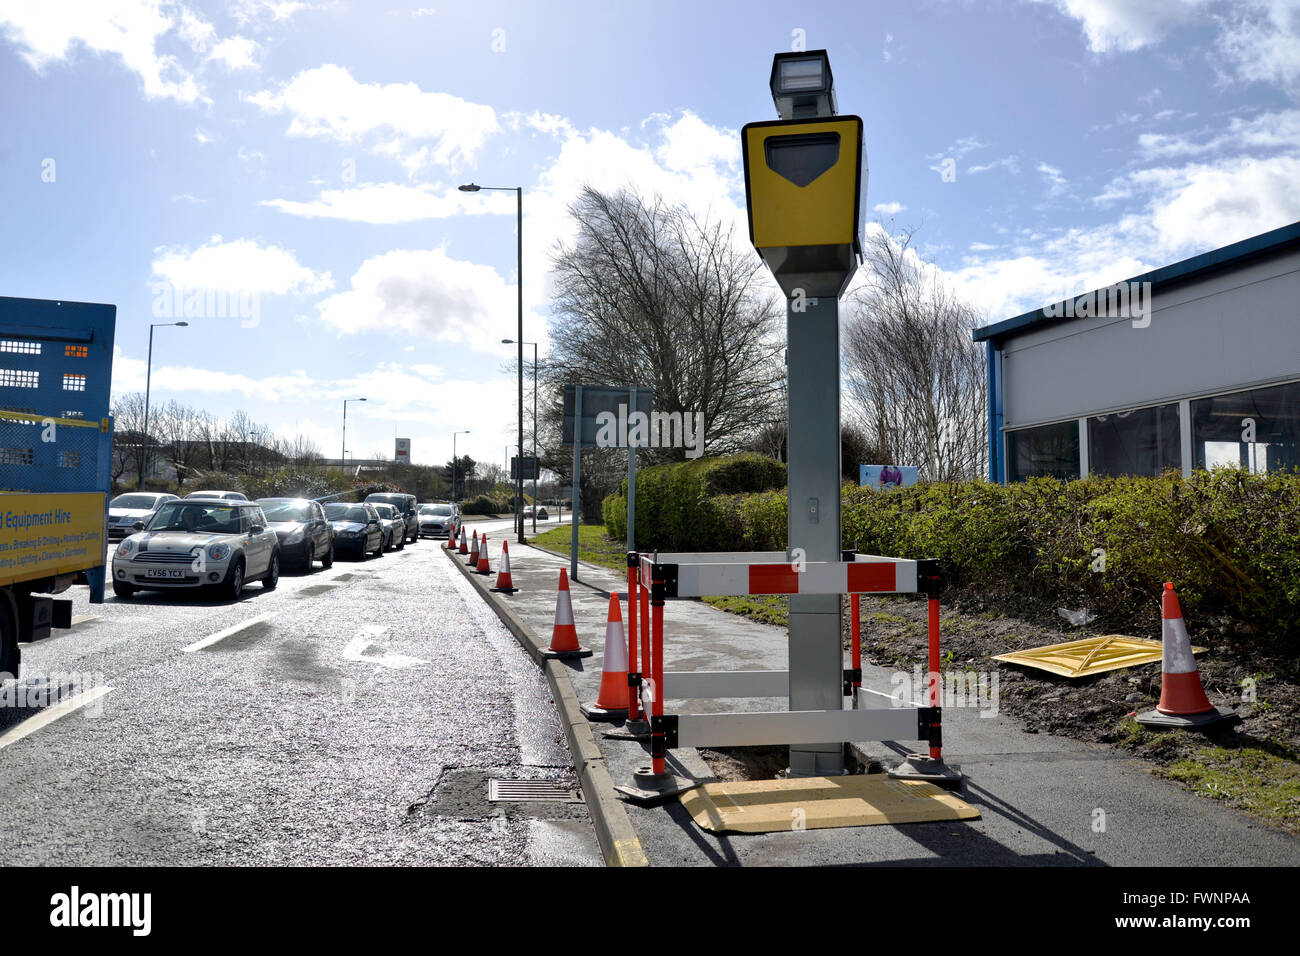 Swansea South Wales UK Wednesday 6th April 2016 Residents of Swansea in South Wales can be forgiven for thiking they will never escape the watchful l eyes of big brother as a series of brand new hi-tec speed and traffic light cameras hve appeared in the city. This camera is situated on one of the main arteries out of the city at Carmarthen Road and is located at traffic lights to catch motorists running red lights. Picture Steve Phillips Stock Photo